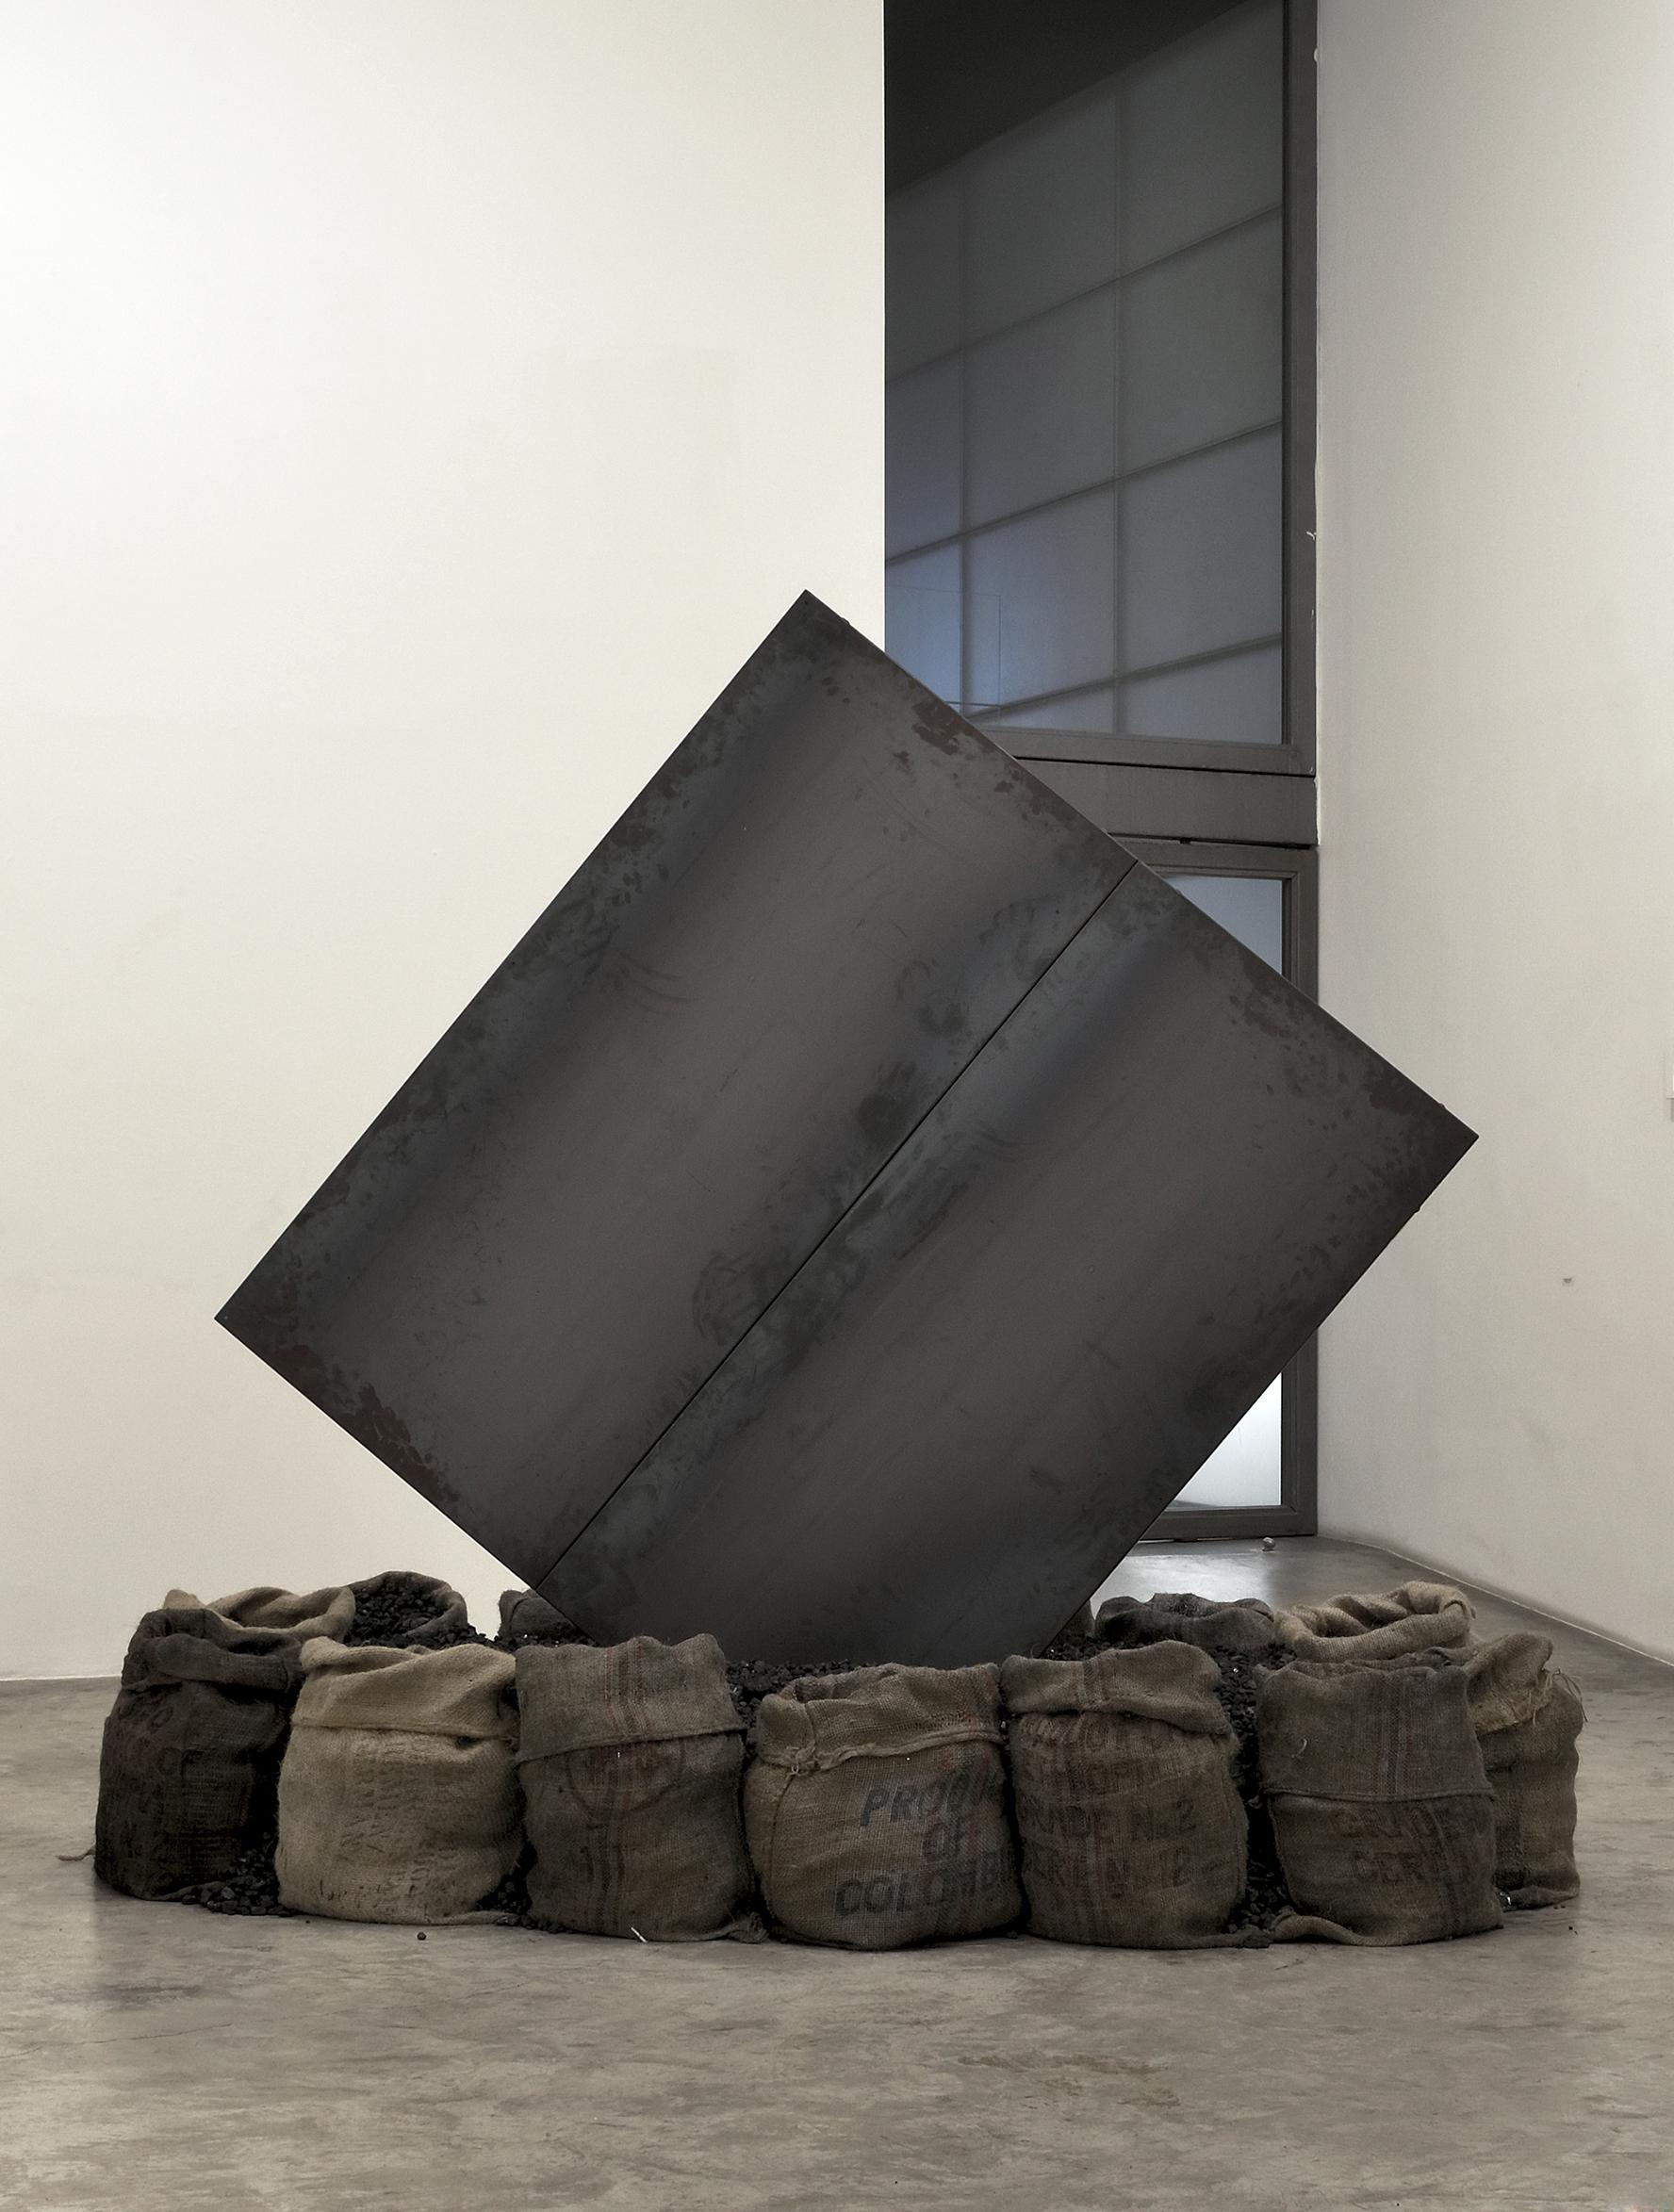 sculpture of square steel plate rotated and standing on point surrounded by burlap sacks filled with coal